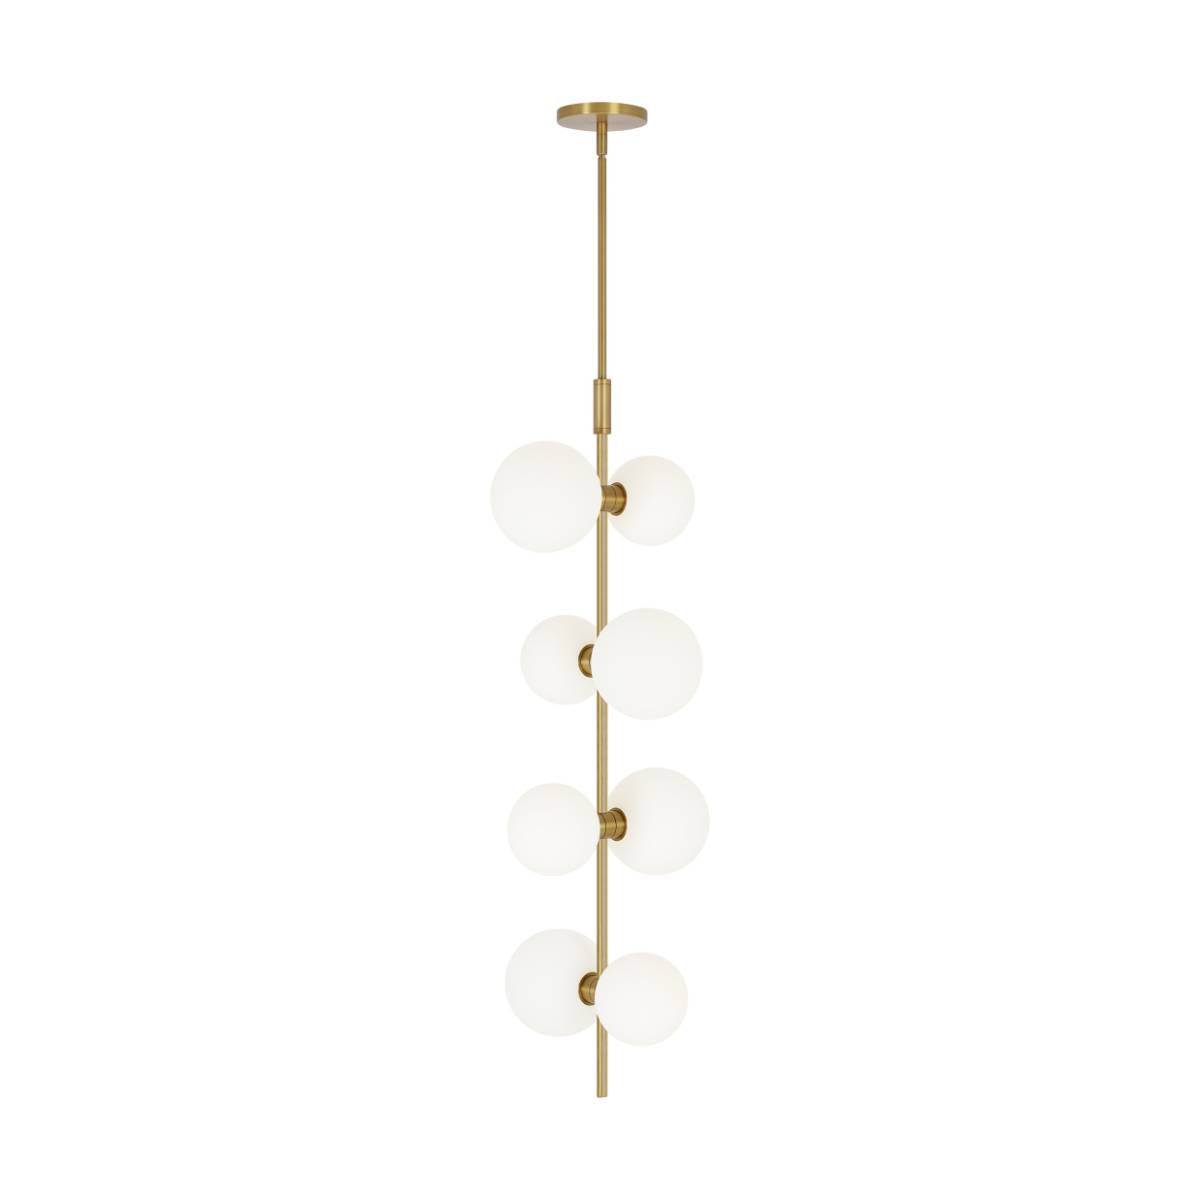 ModernRail 9 in. 8 Lights LED Pendant Light with Remote Conopy Brass Finish Glass Orbs